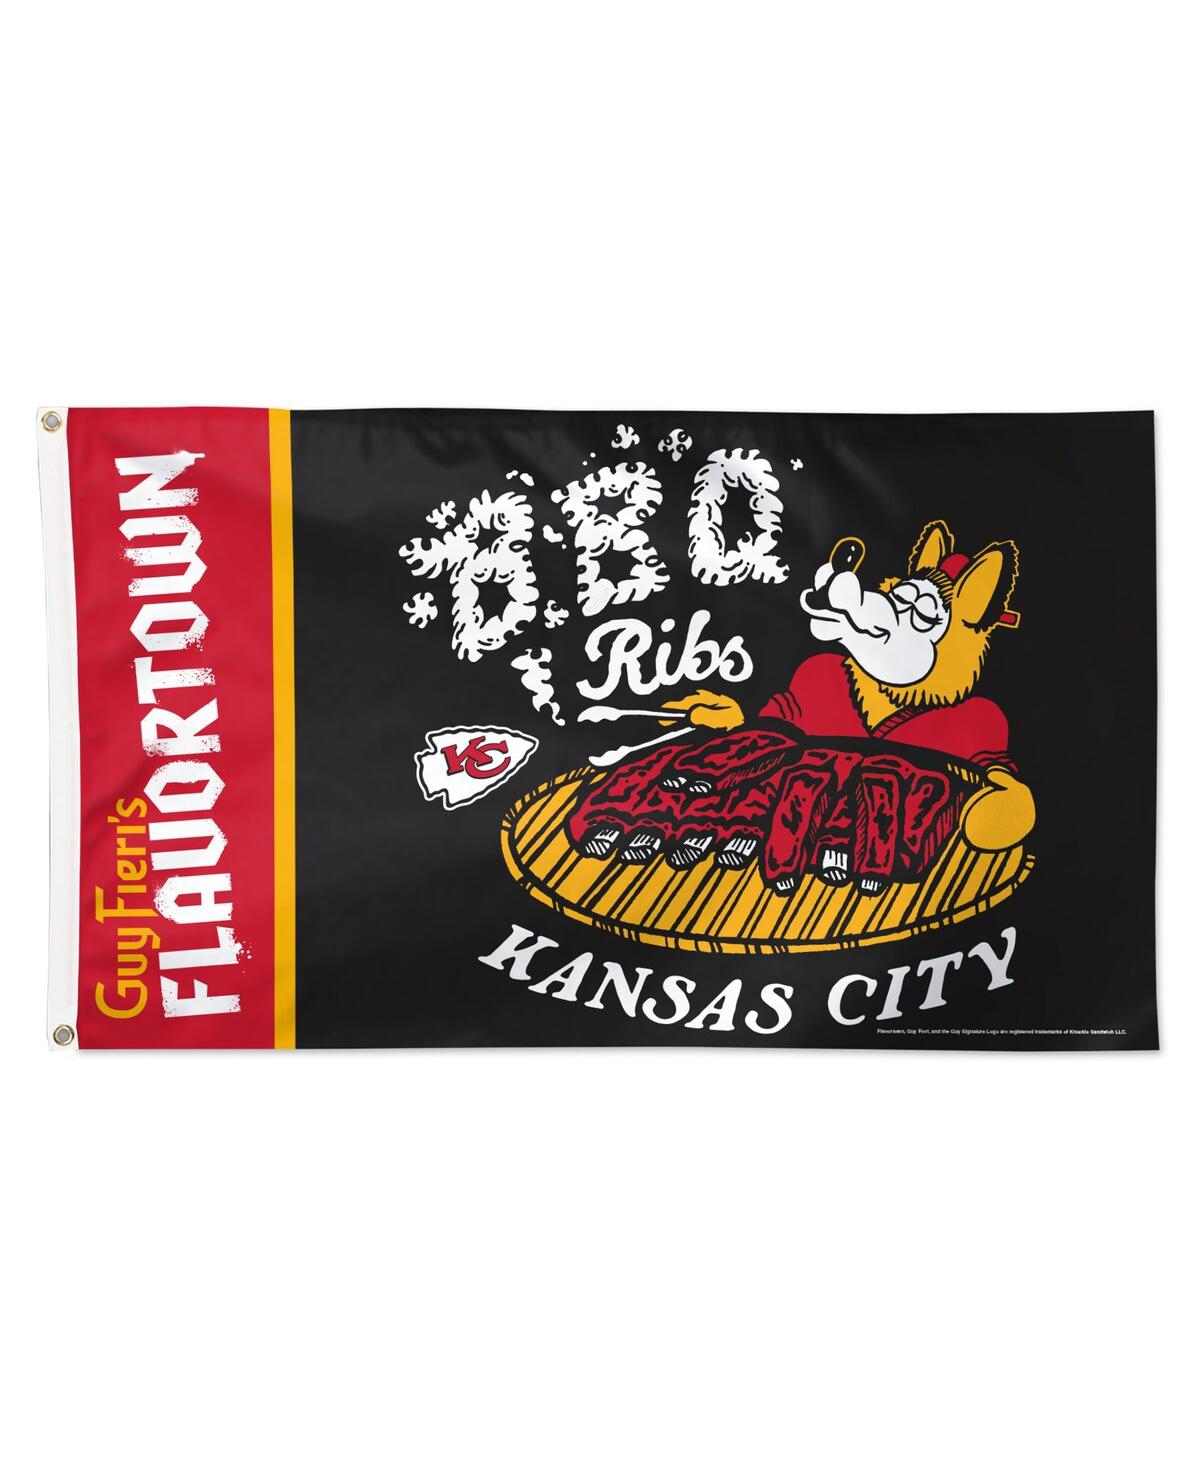 Kansas City Chiefs Nfl x Guy Fieri's Flavortown 3' x 5' One-Sided Deluxe Flag - Red, Black